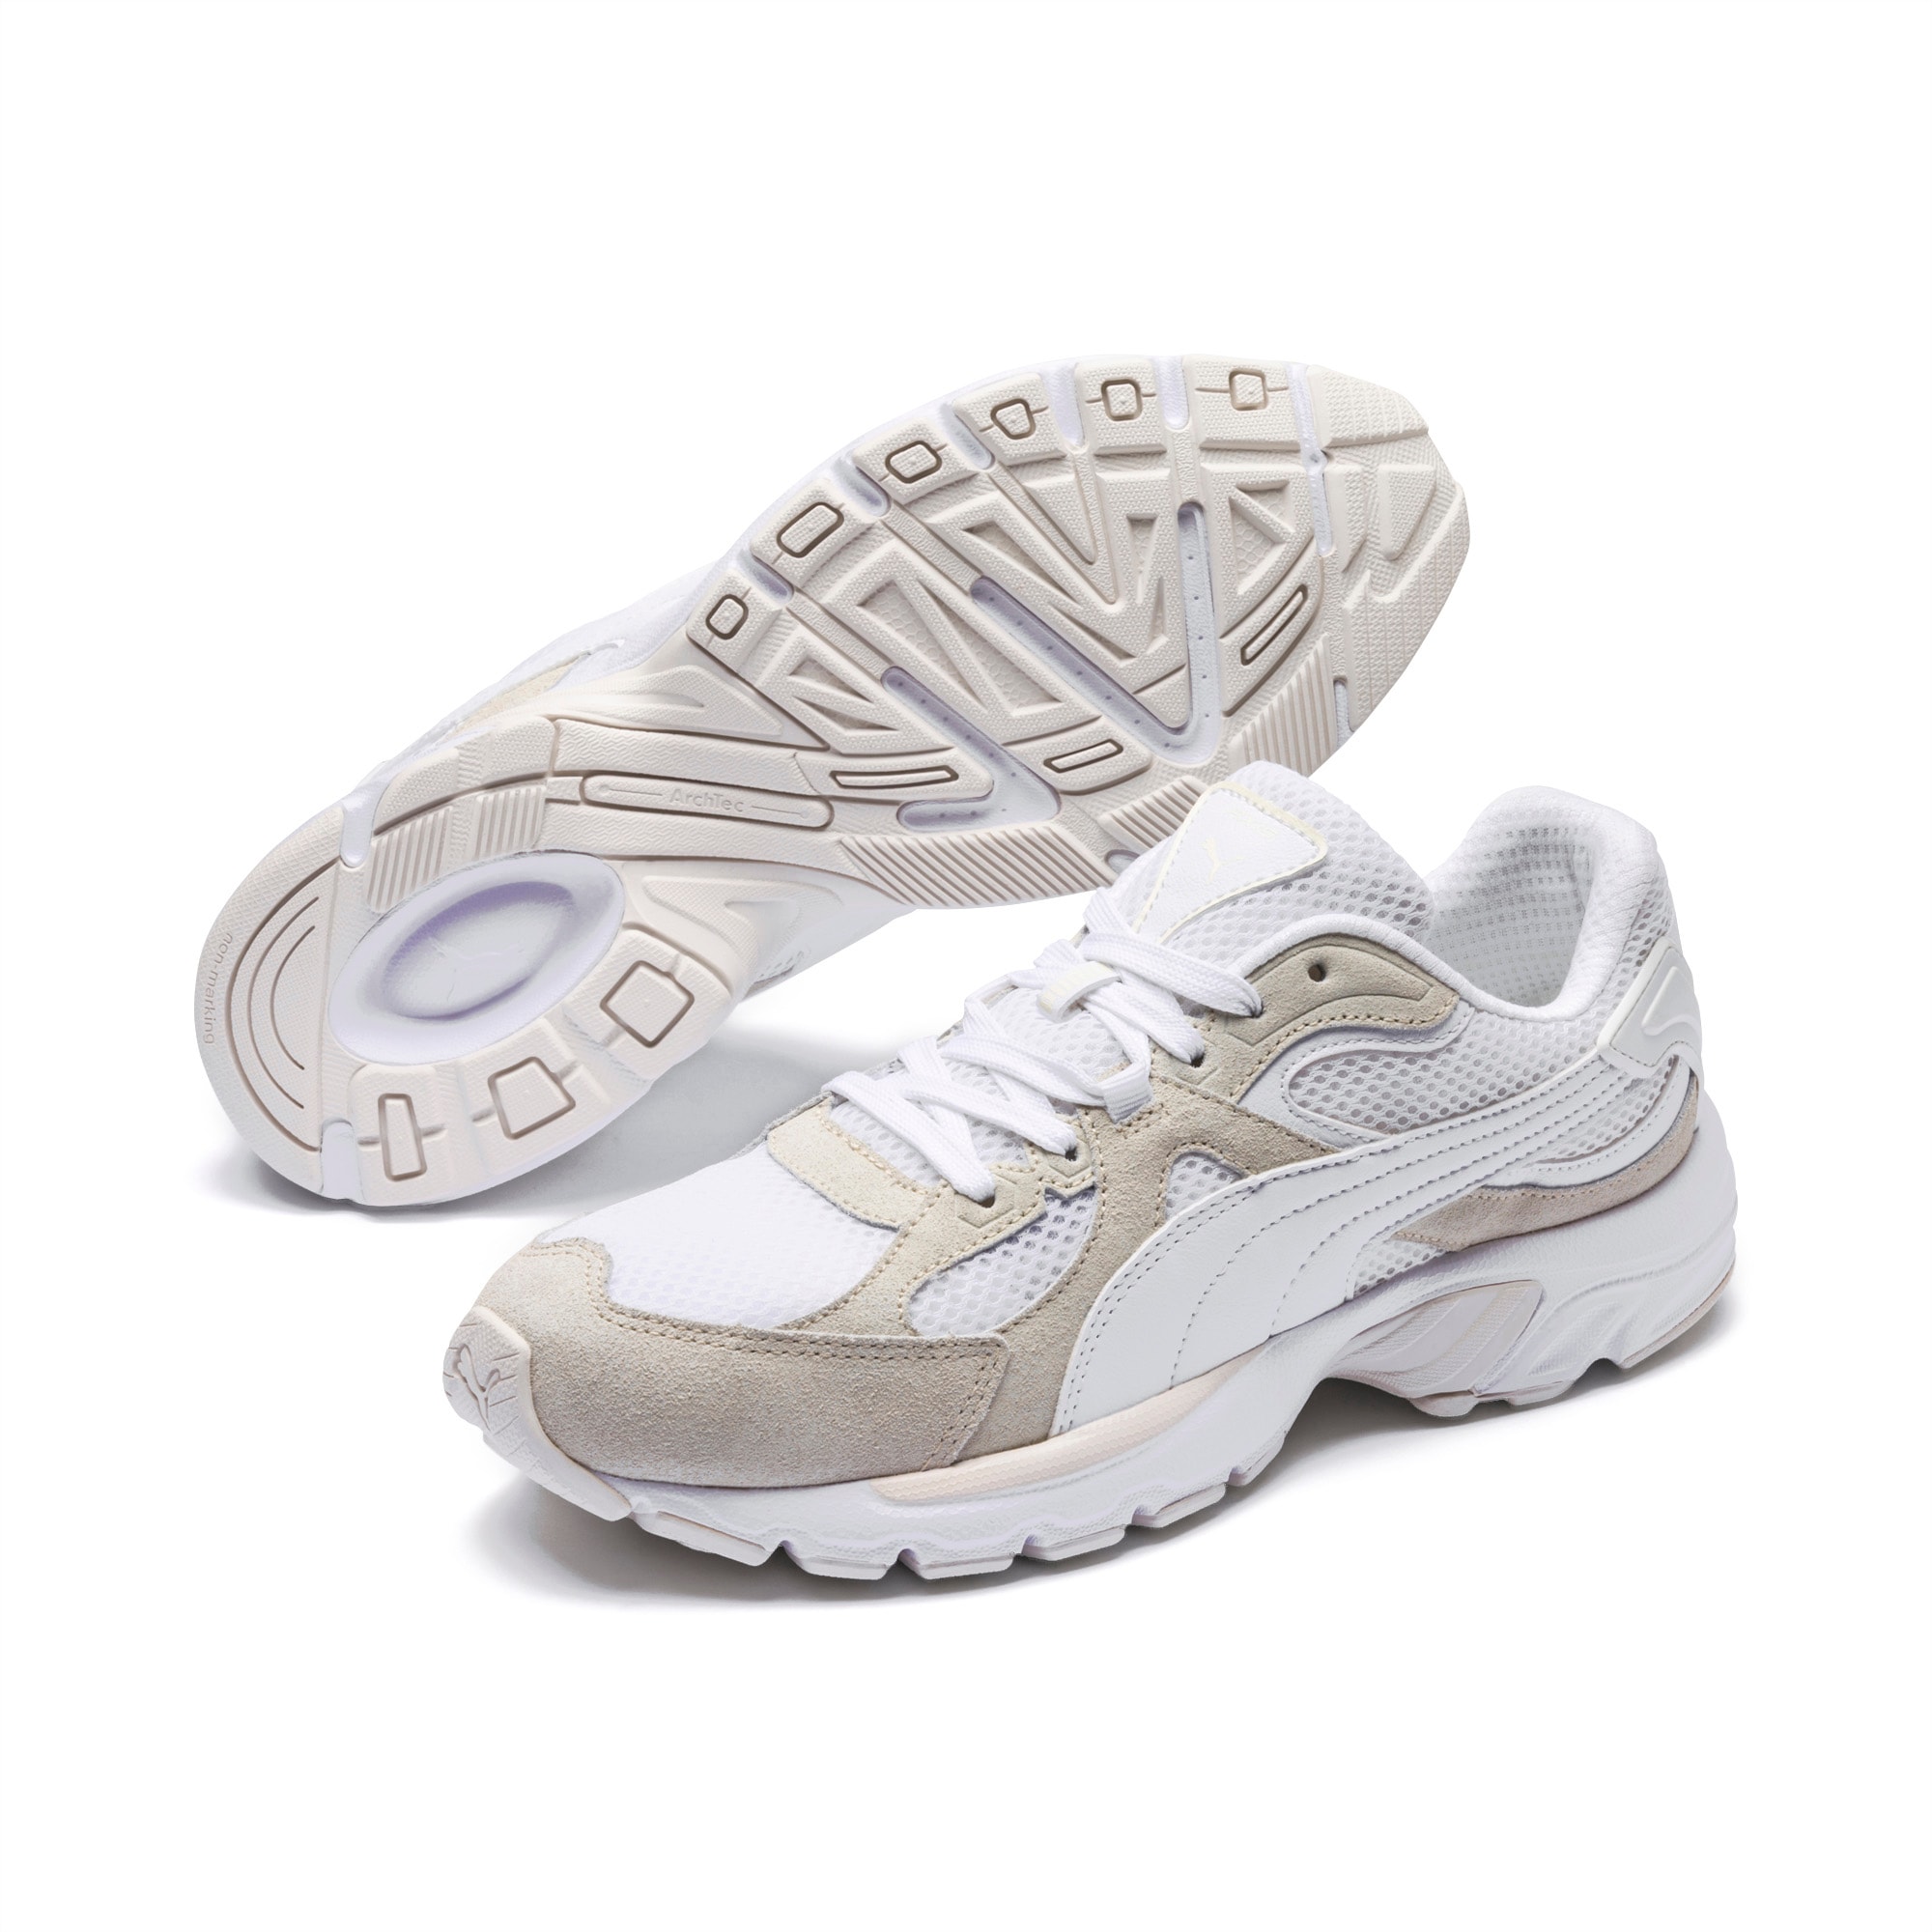 Axis Plus SD Trainers | PUMA Running Special | PUMA